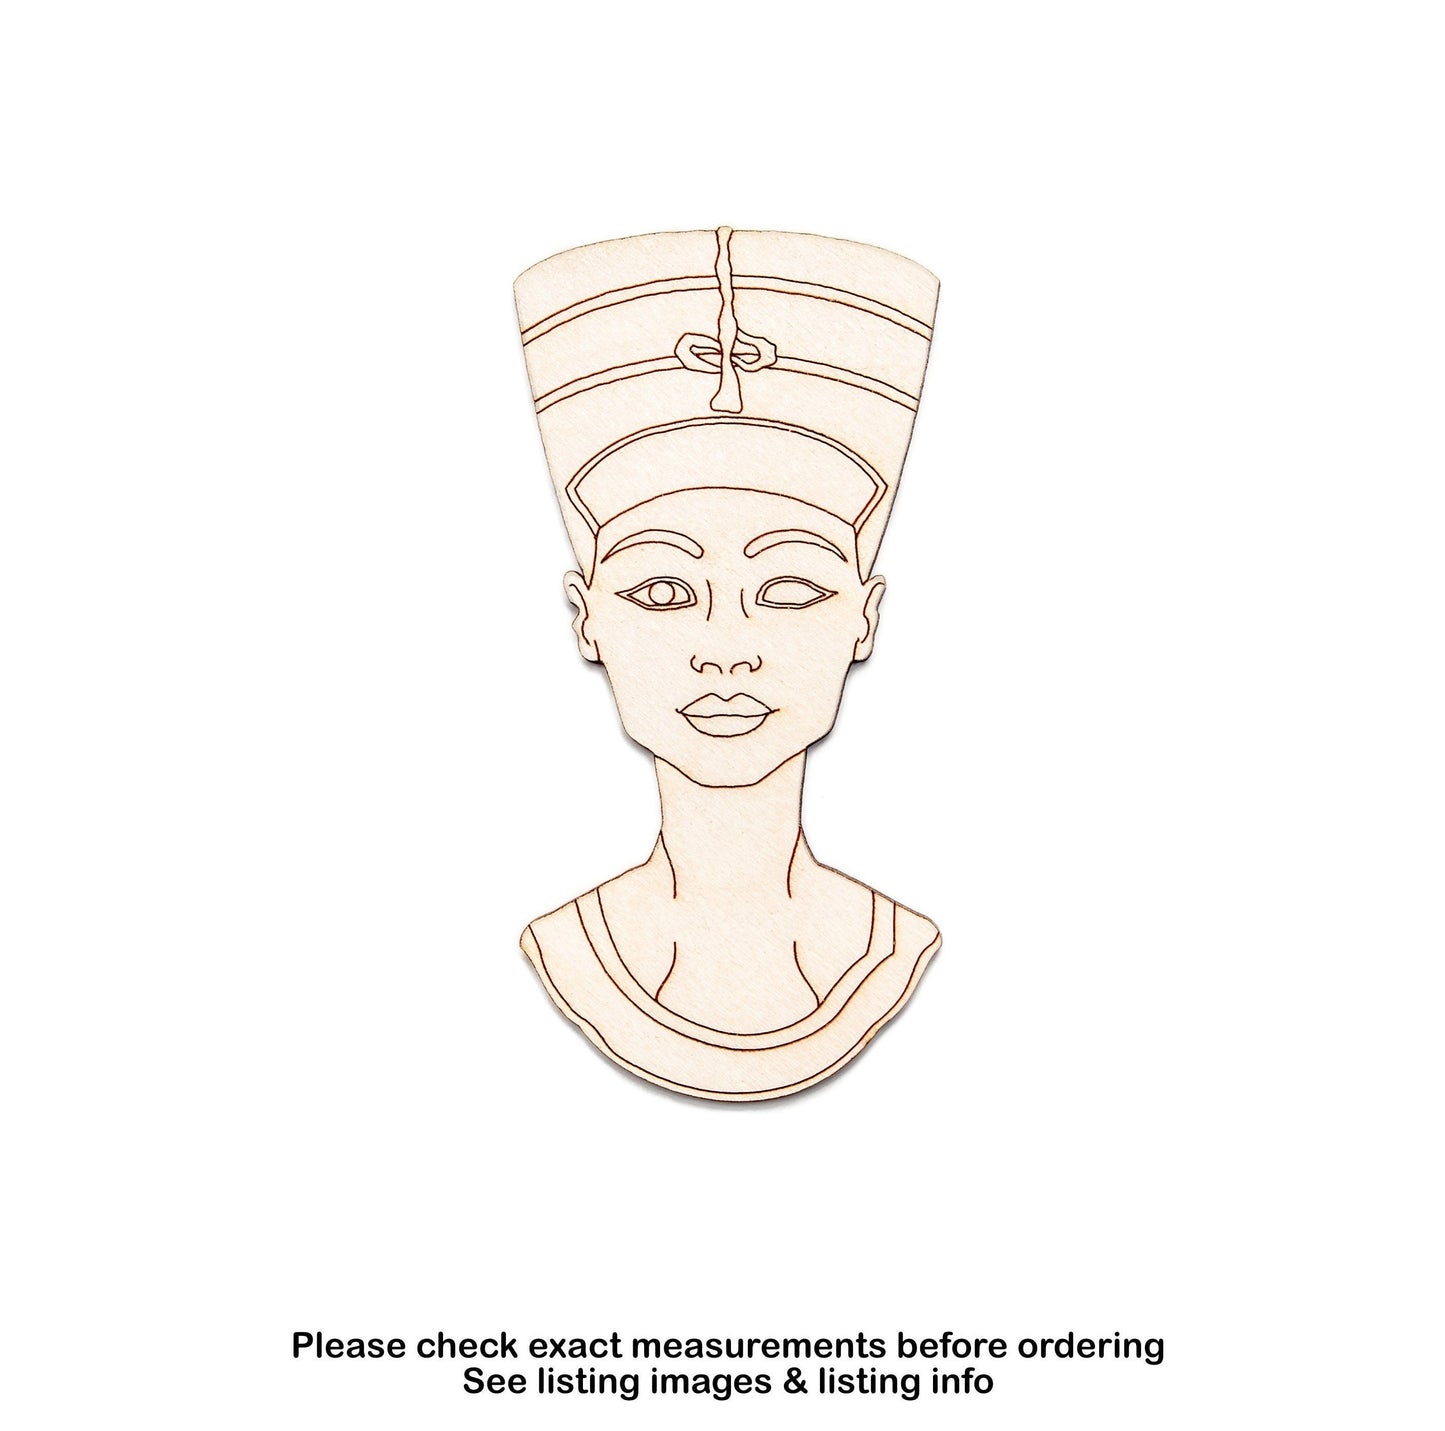 Nefertiti Bust-Front-Detail Wood Cutout-Egyptian Queen-Iconic Bust-Various Sizes-DIY Crafts-Egyptian Theme Decor-Ancient History Wood Cuts